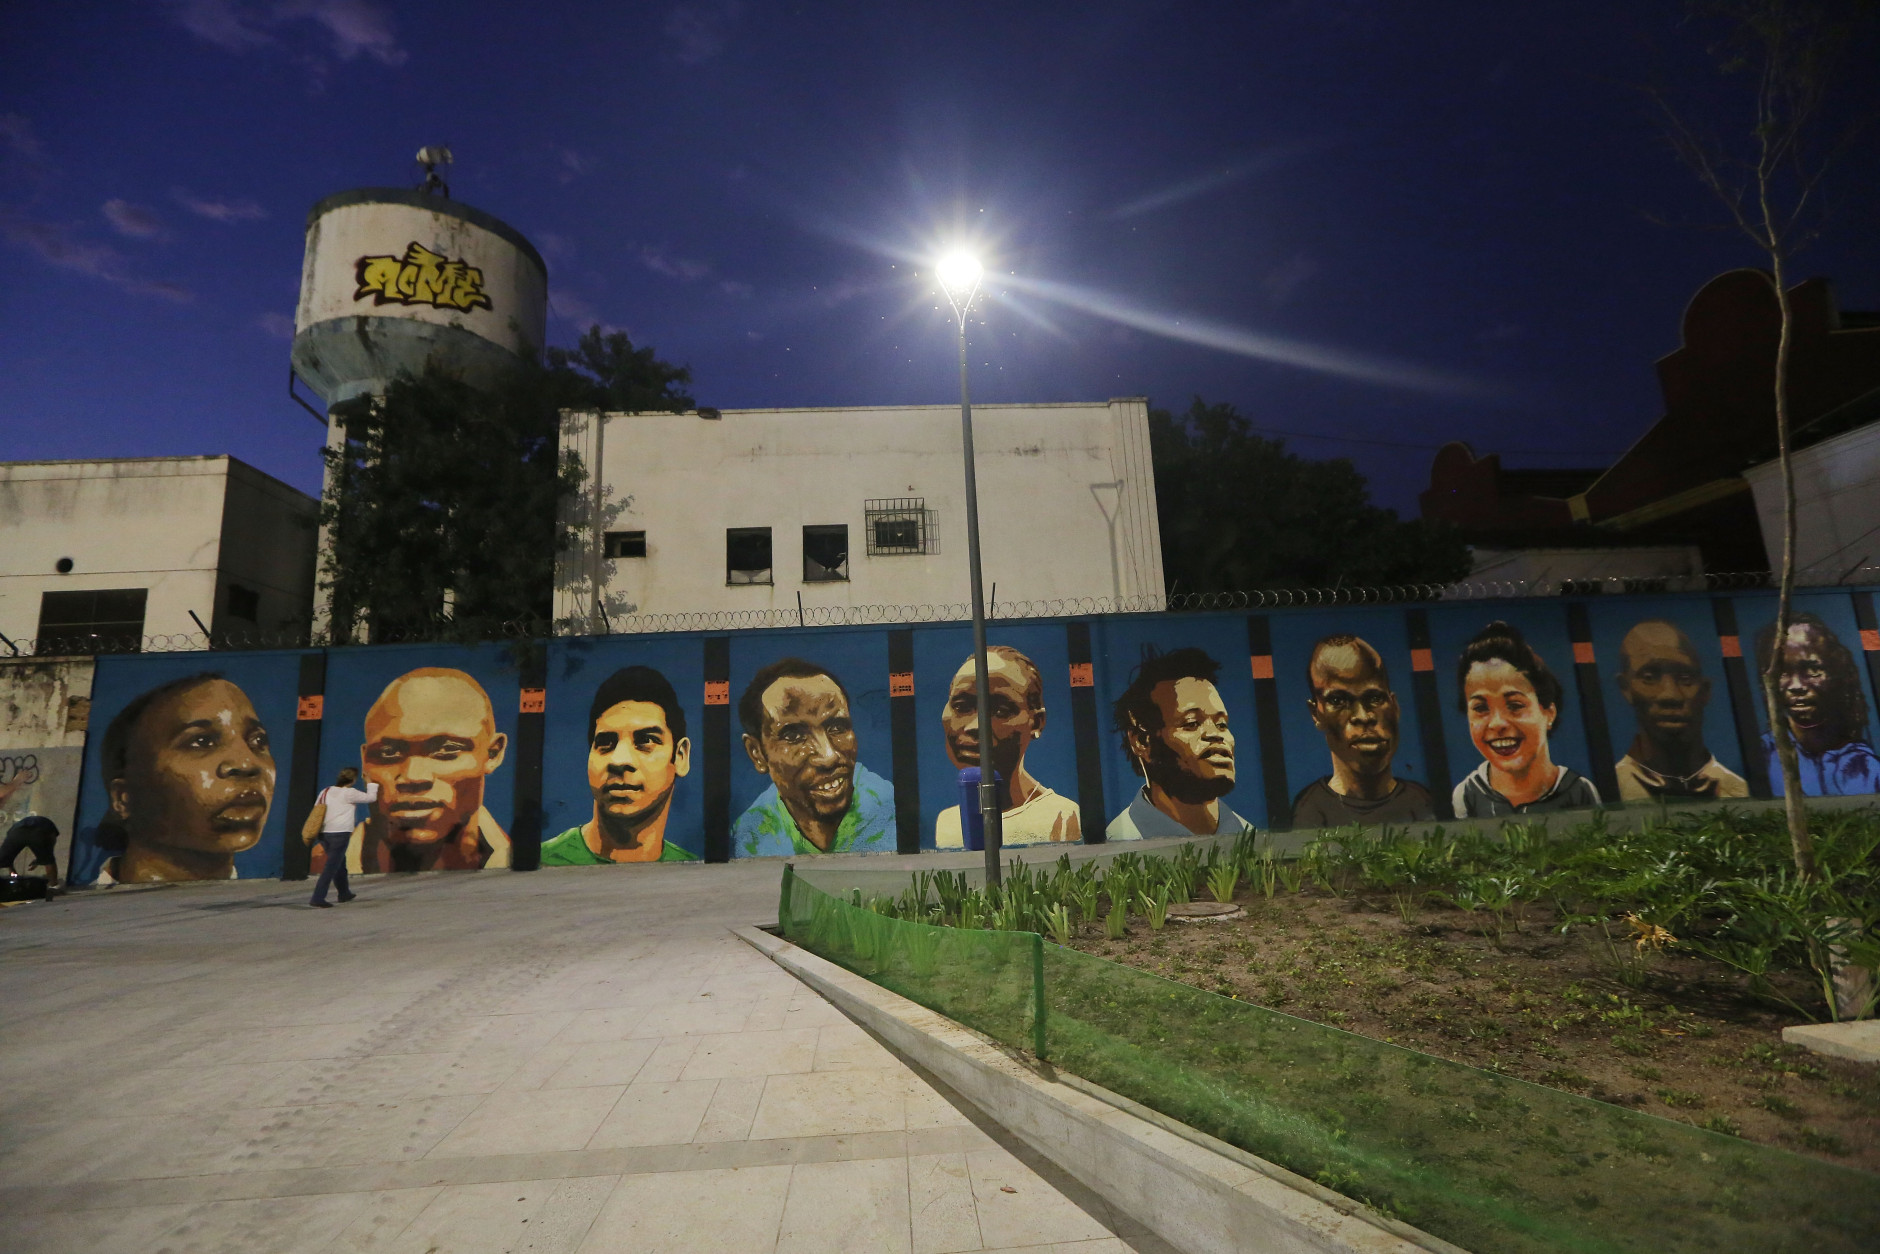 RIO DE JANEIRO, BRAZIL - AUGUST 17:  Dusk descends over a new mural of street art honoring the first Olympic refugee team during the Rio 2016 Olympic Games on August 17, 2016 in Rio de Janeiro, Brazil. The graffitti, created by the artists Rodrigo Sini and Cety Soledade, honors the stateless refugees, six men and four women, who hail from South Sudan, Syria, the Deomocratic Republic of Congo and Ethiopia.  (Photo by Mario Tama/Getty Images)